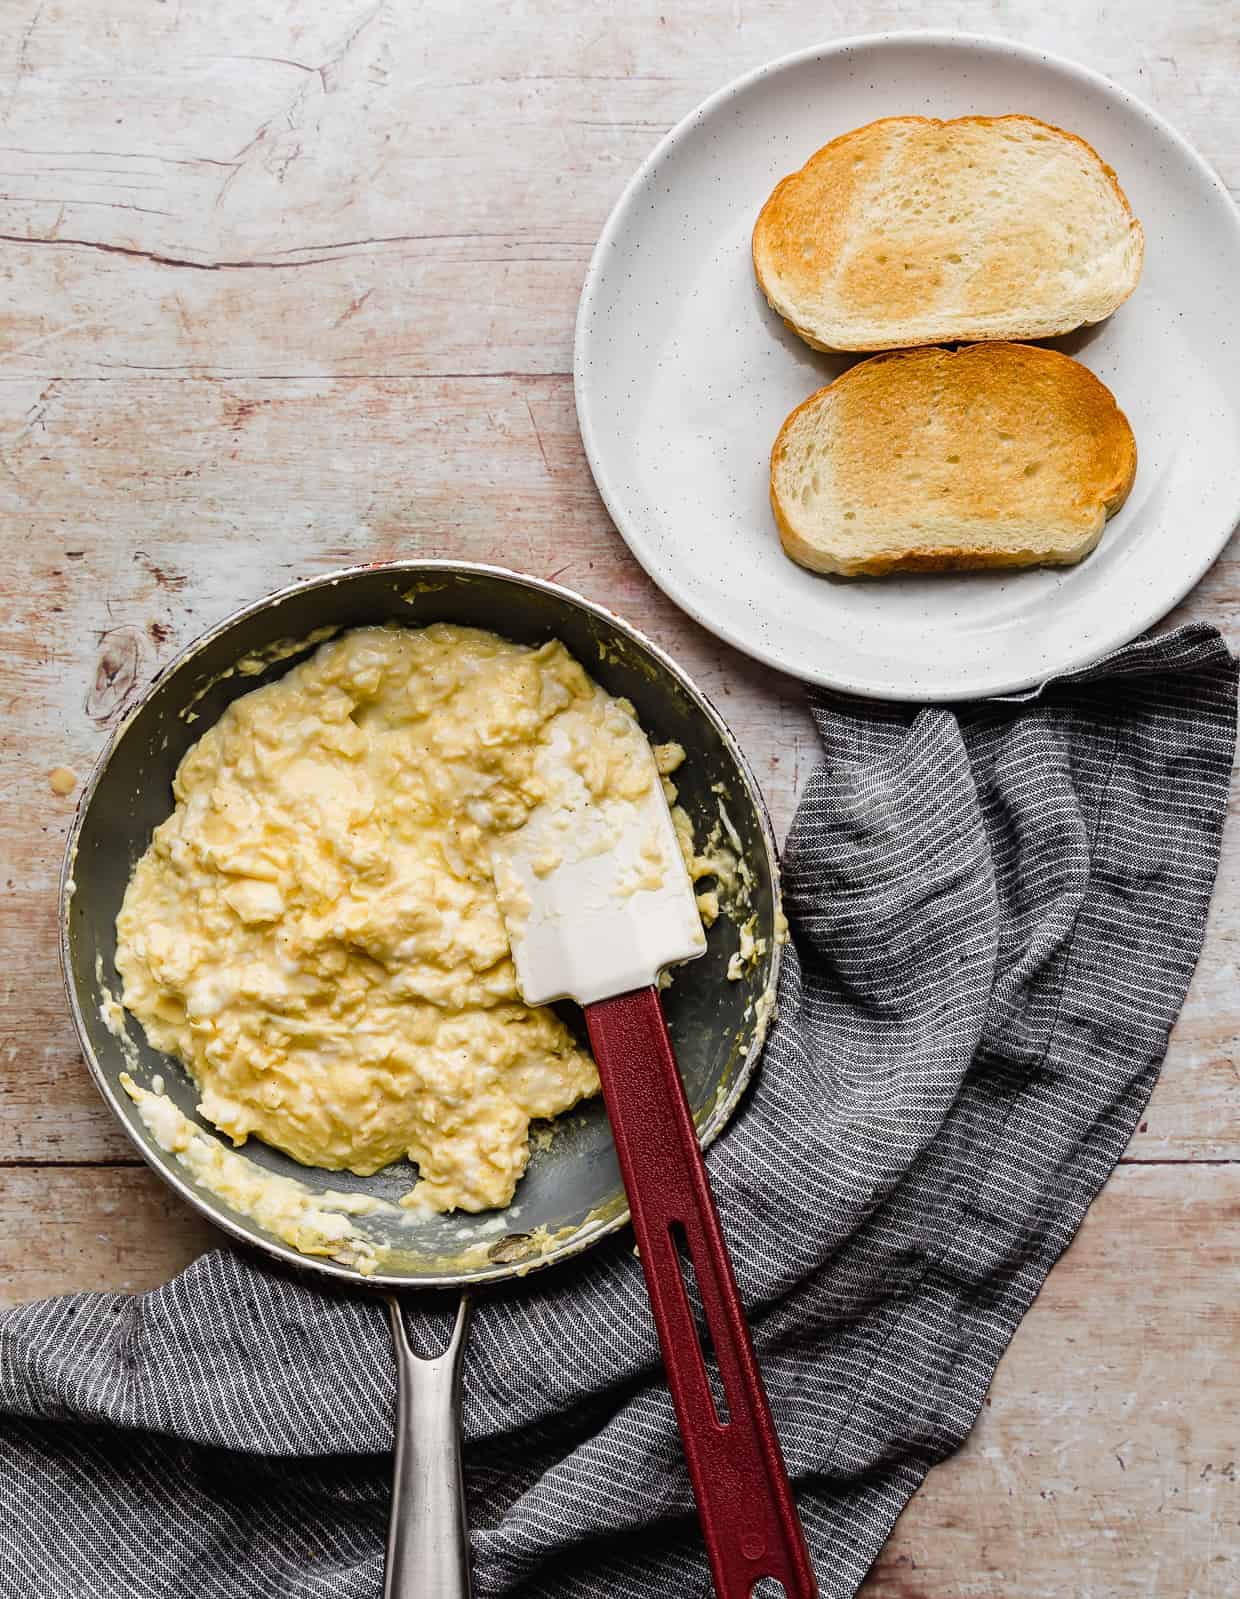 A skillet with scrambled eggs in it, and a plate with 2 toasted slices of bread on it. 